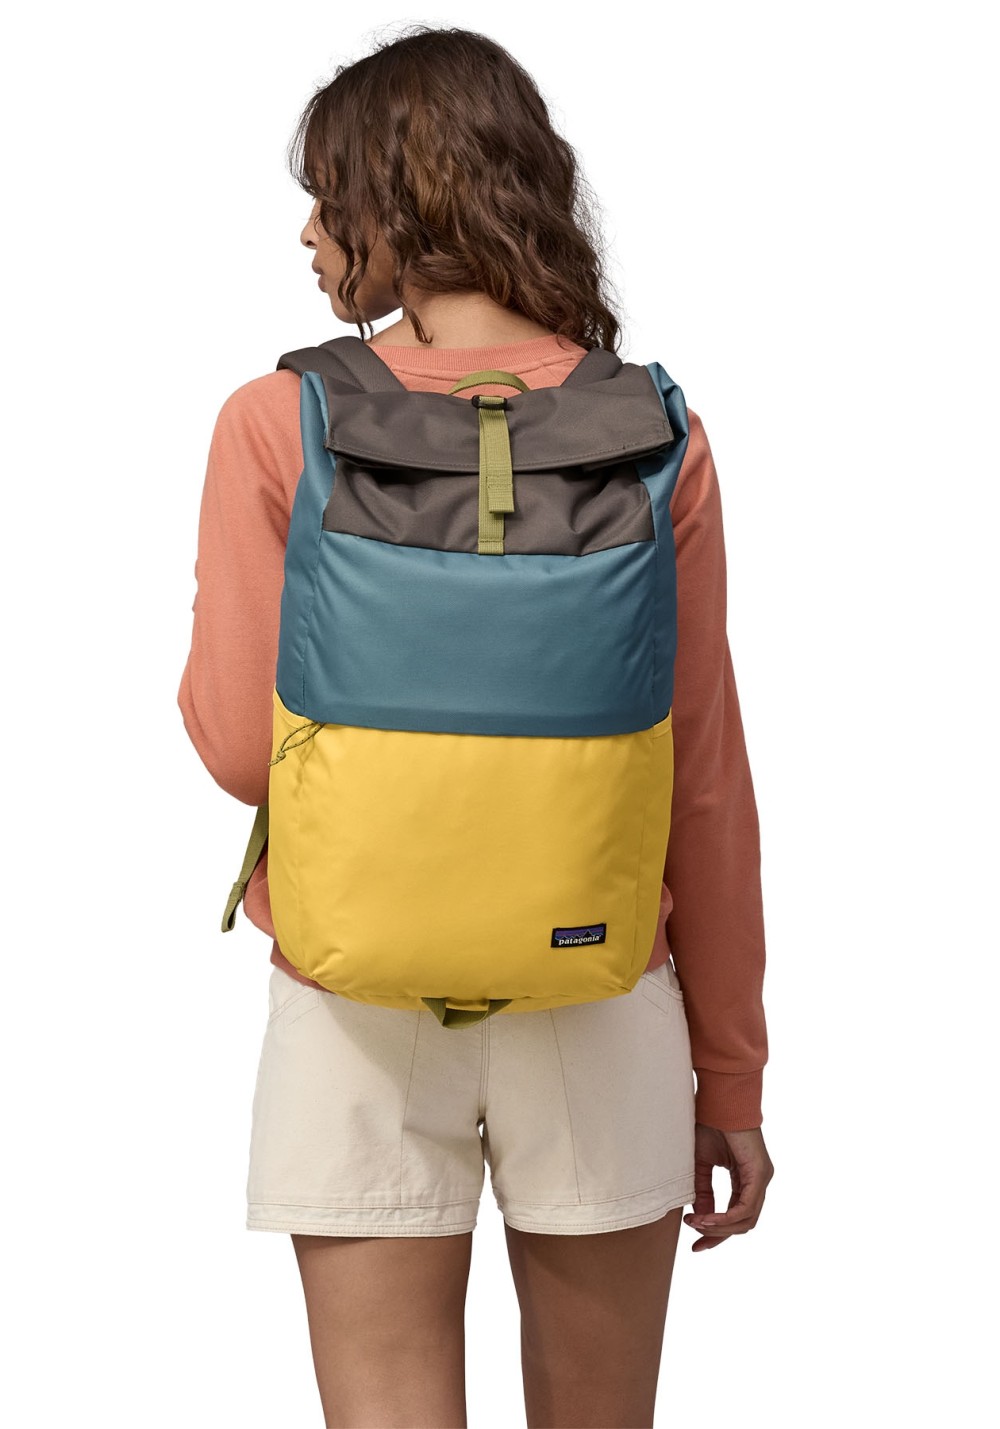 Rucksack Fieldsmith Roll-Top Pack 30L Patchwork: Surfboard Yellow w/Abalone Blue